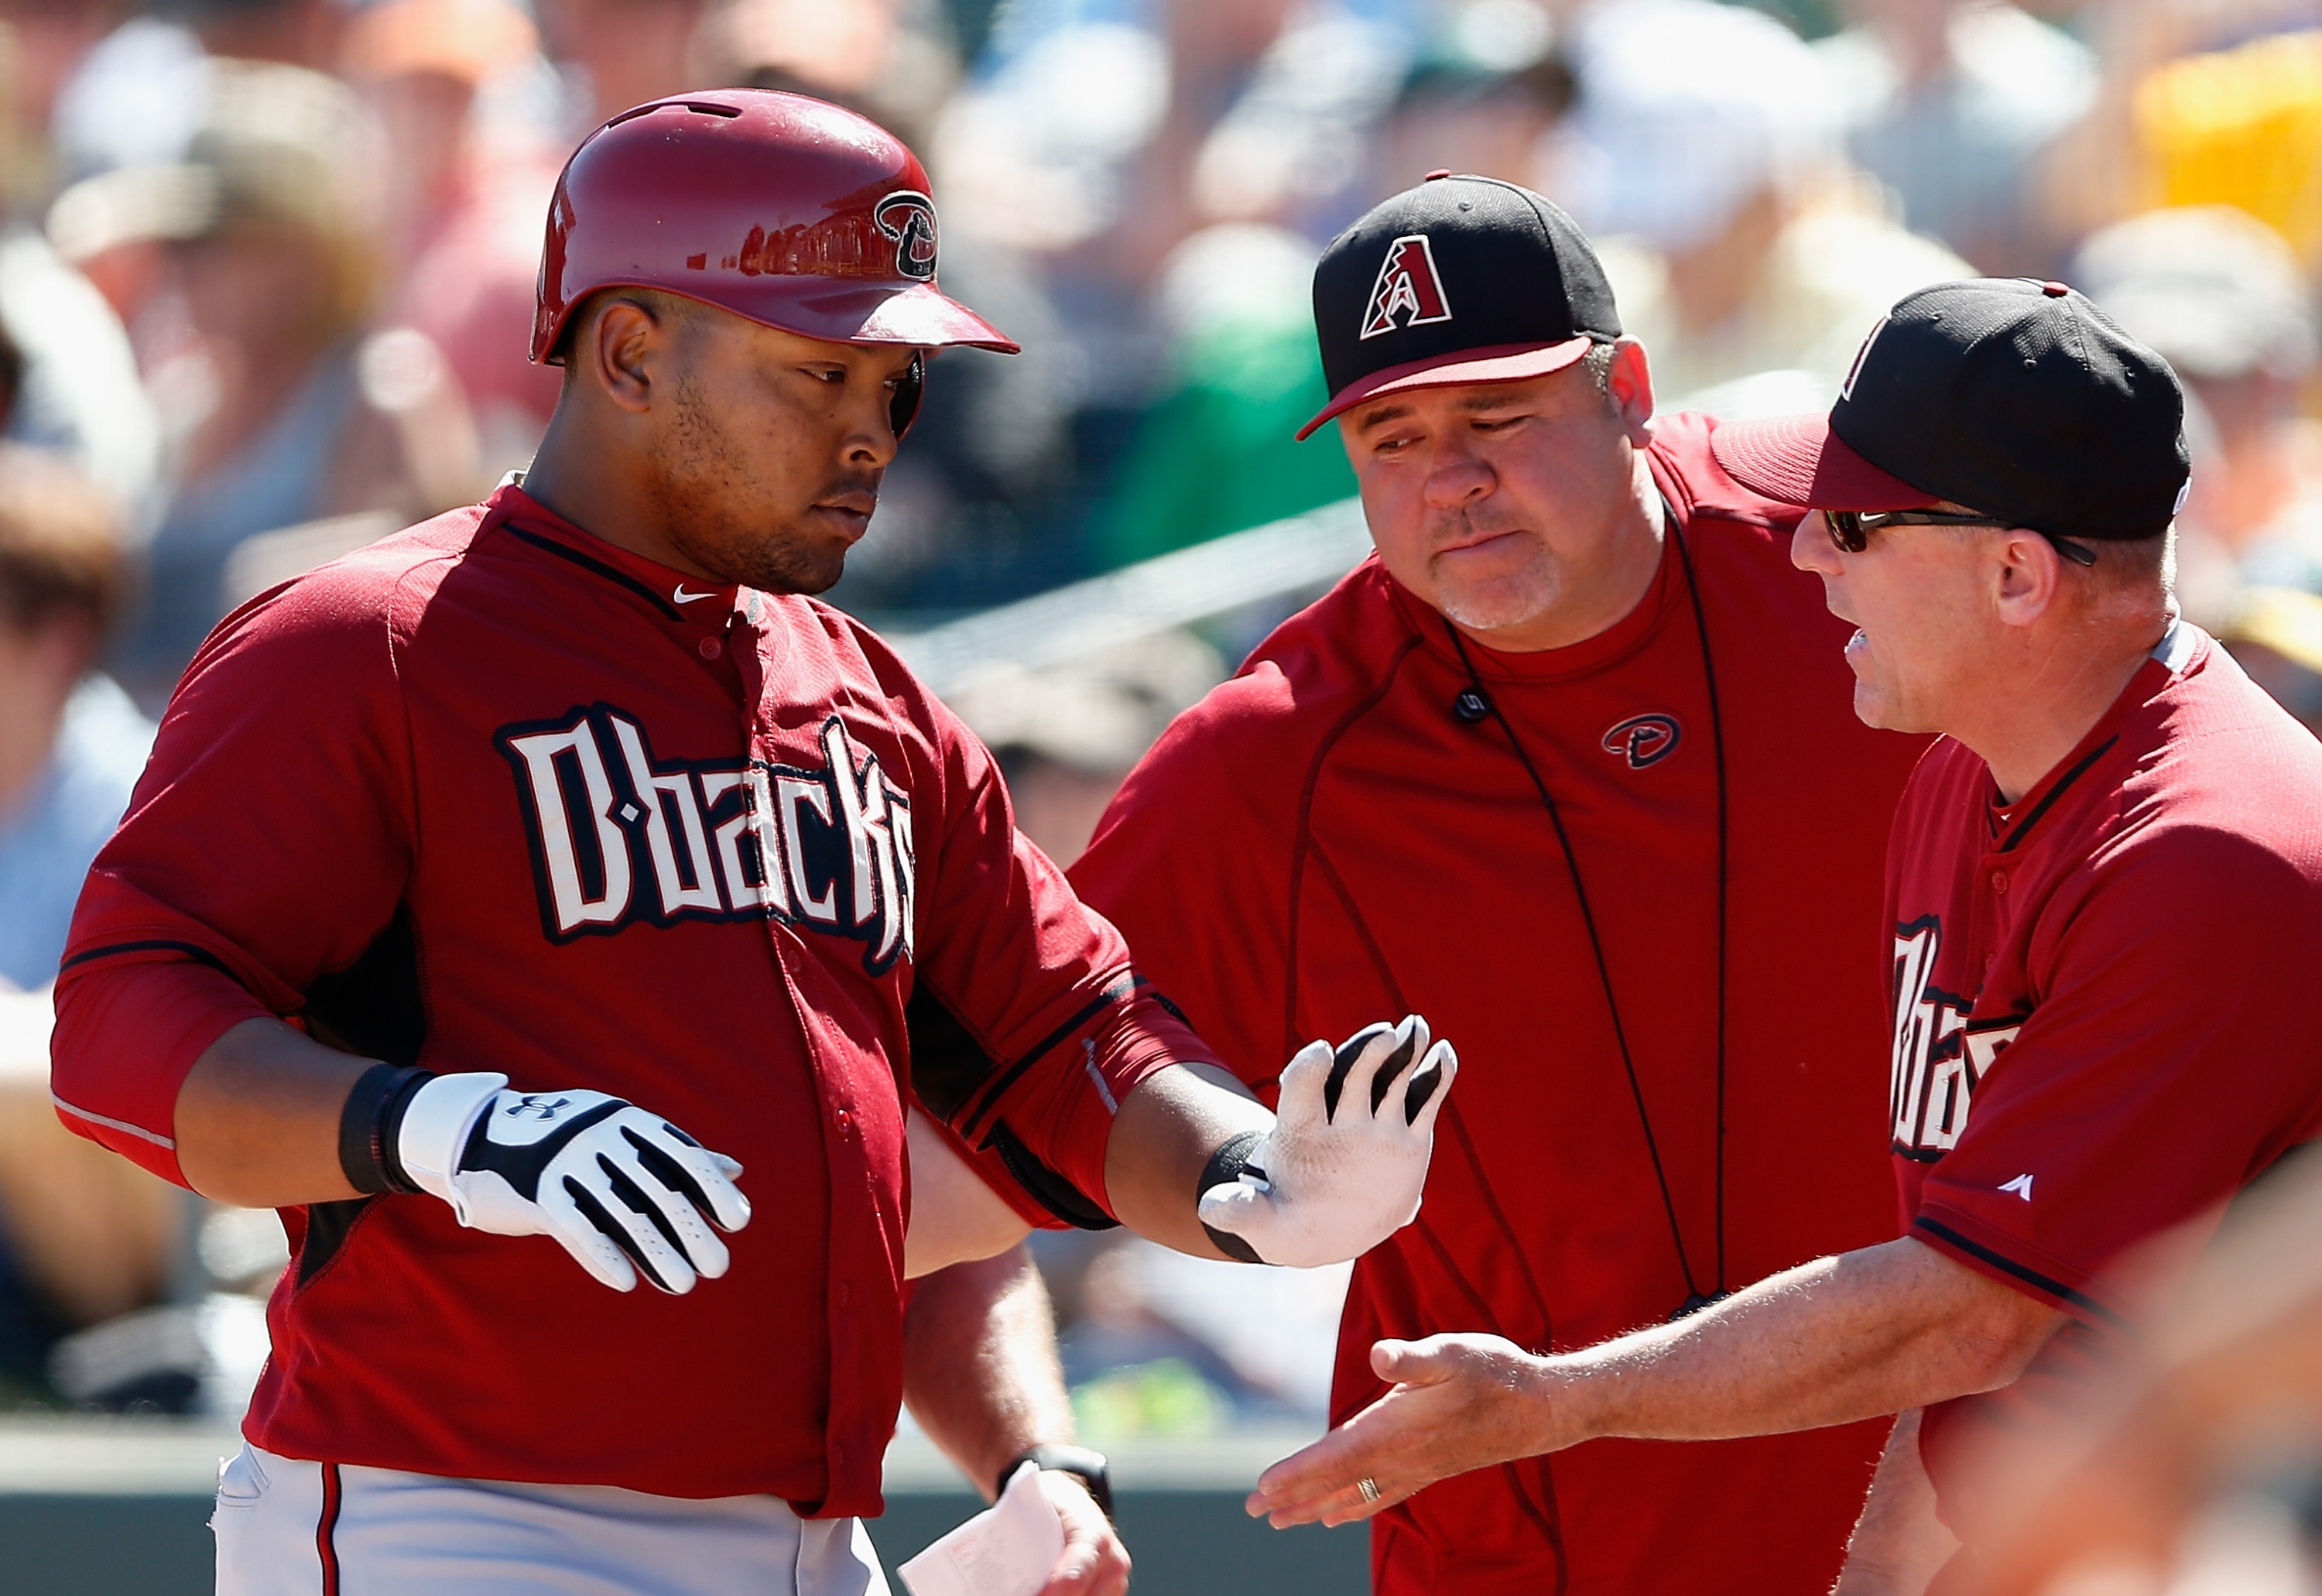 New Cuban import Yasmany Tomas didn't have a great spring for Arizona. (Getty Images)